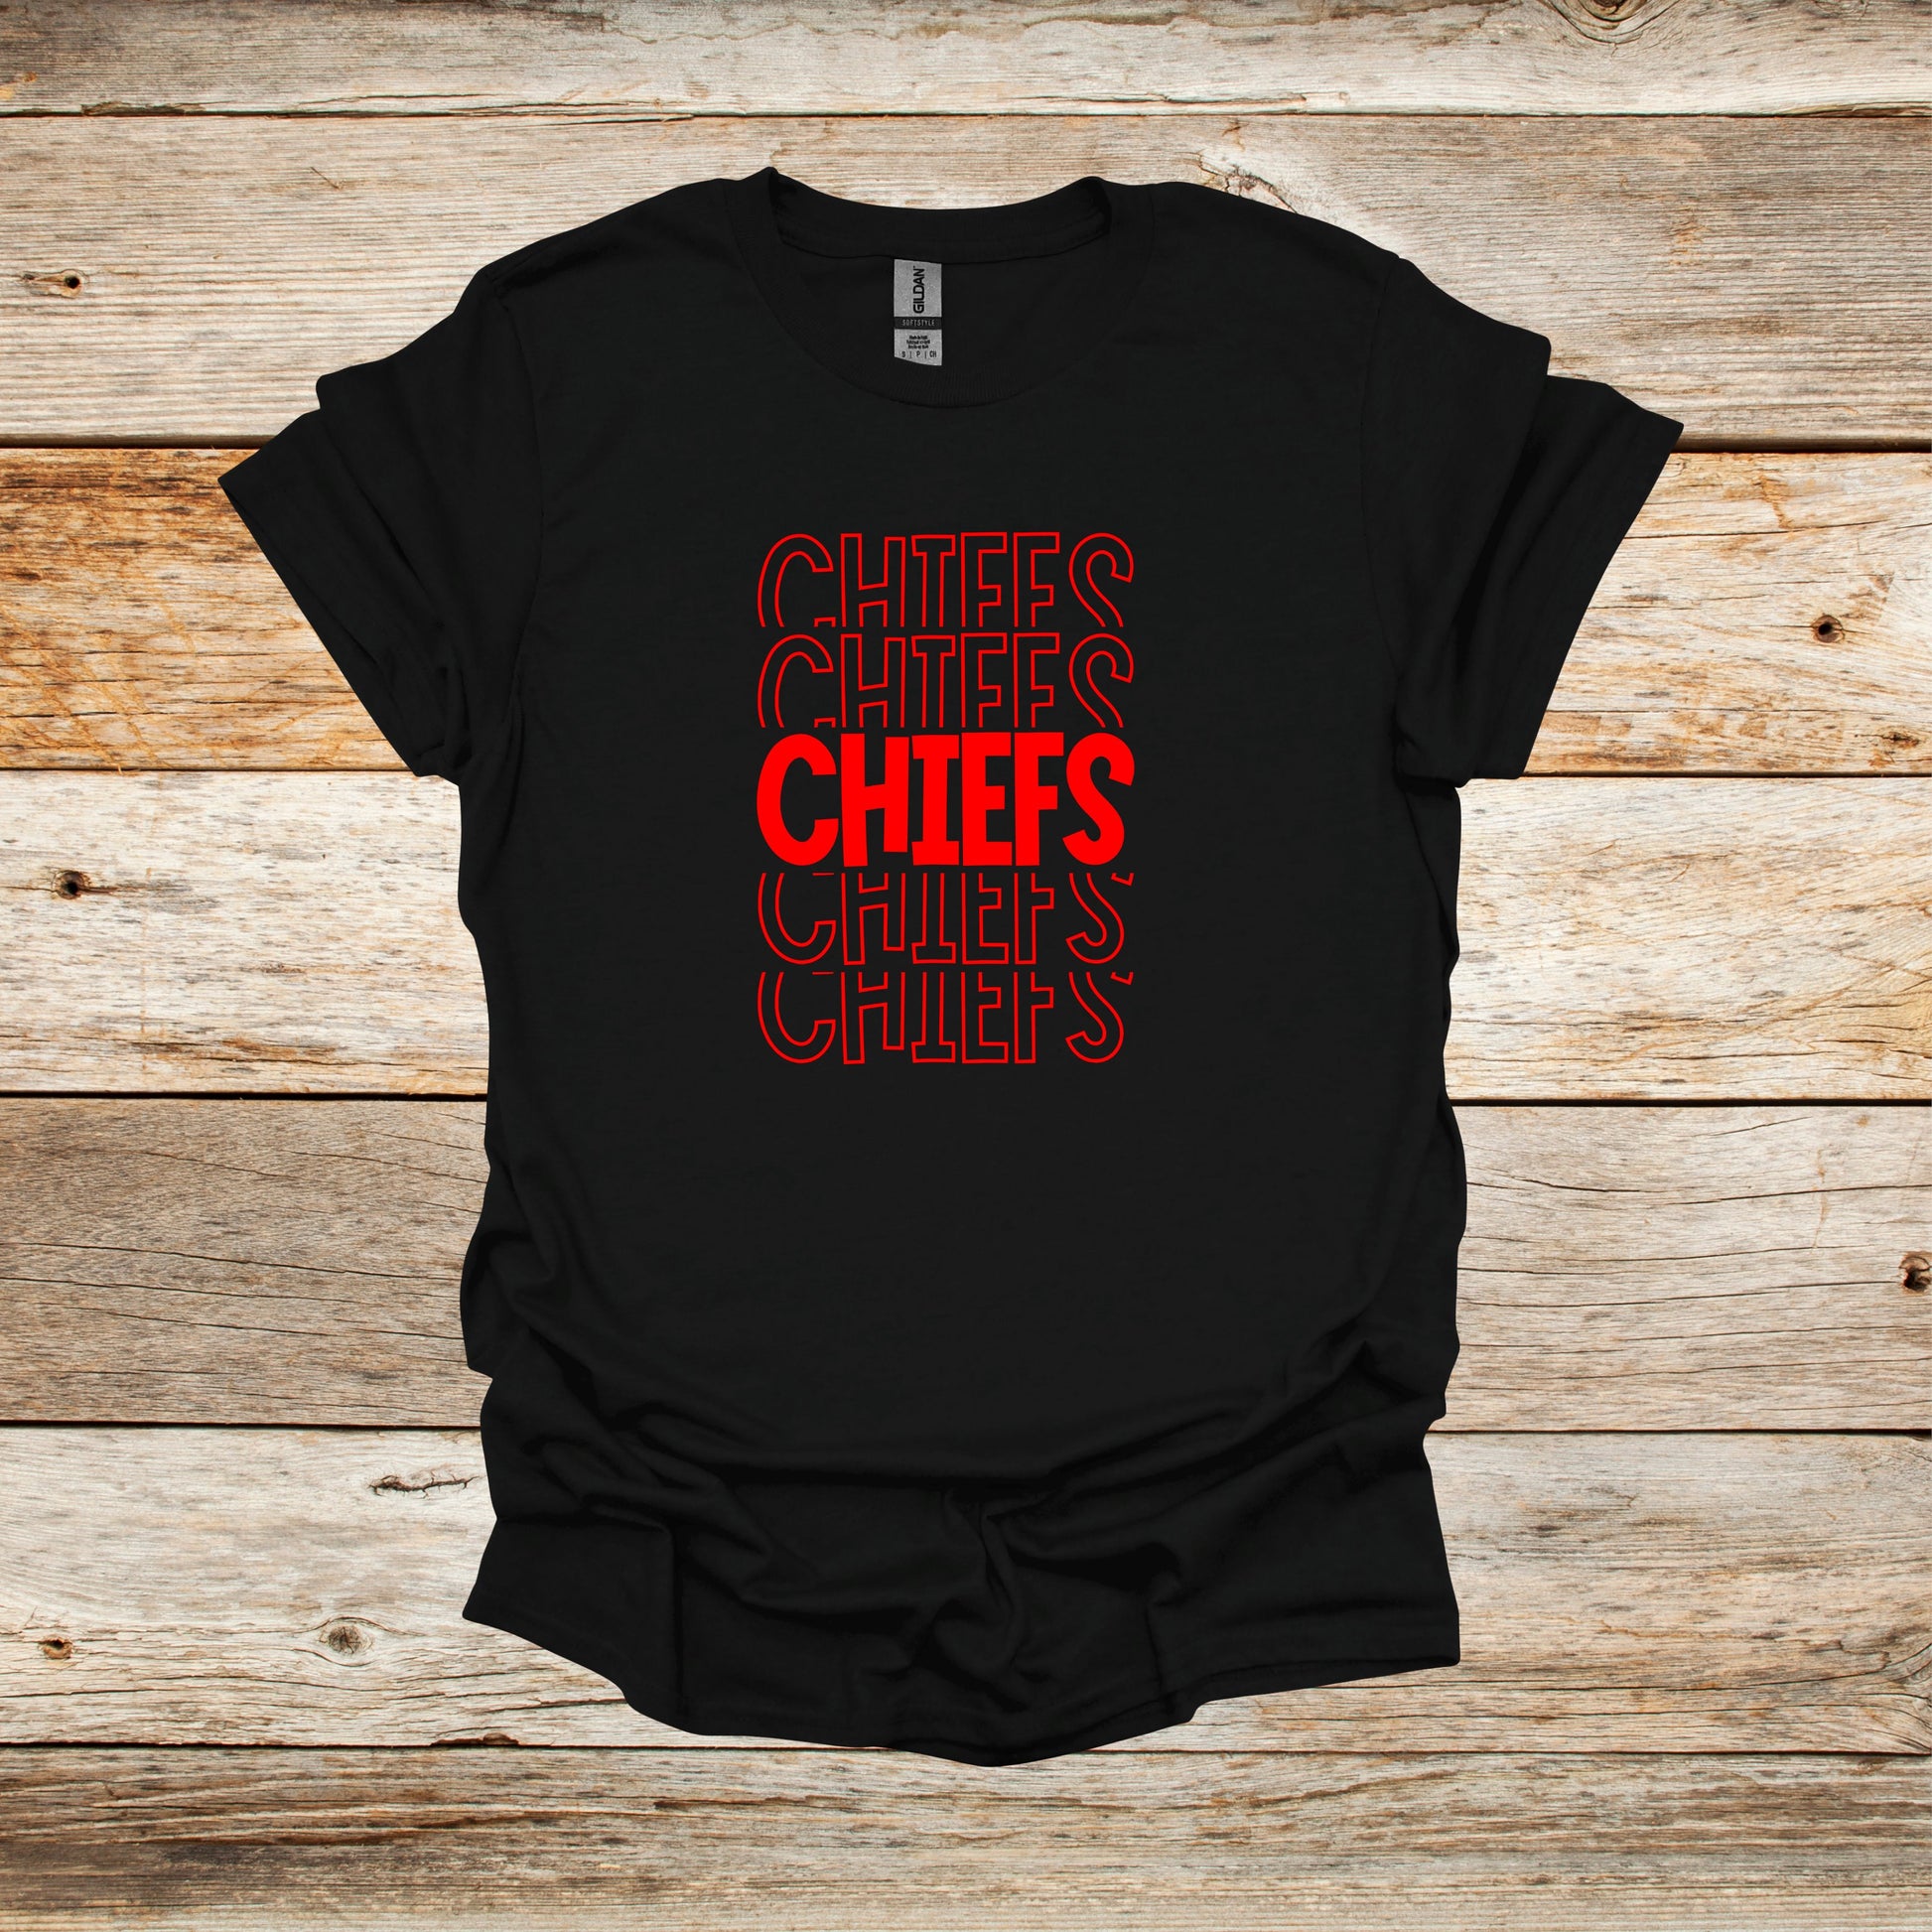 Football T-Shirt - Kansas City Chiefs - Chiefs - Adult and Children's Tee Shirts - Chiefs - Sports T-Shirts Graphic Avenue Black Adult Small 